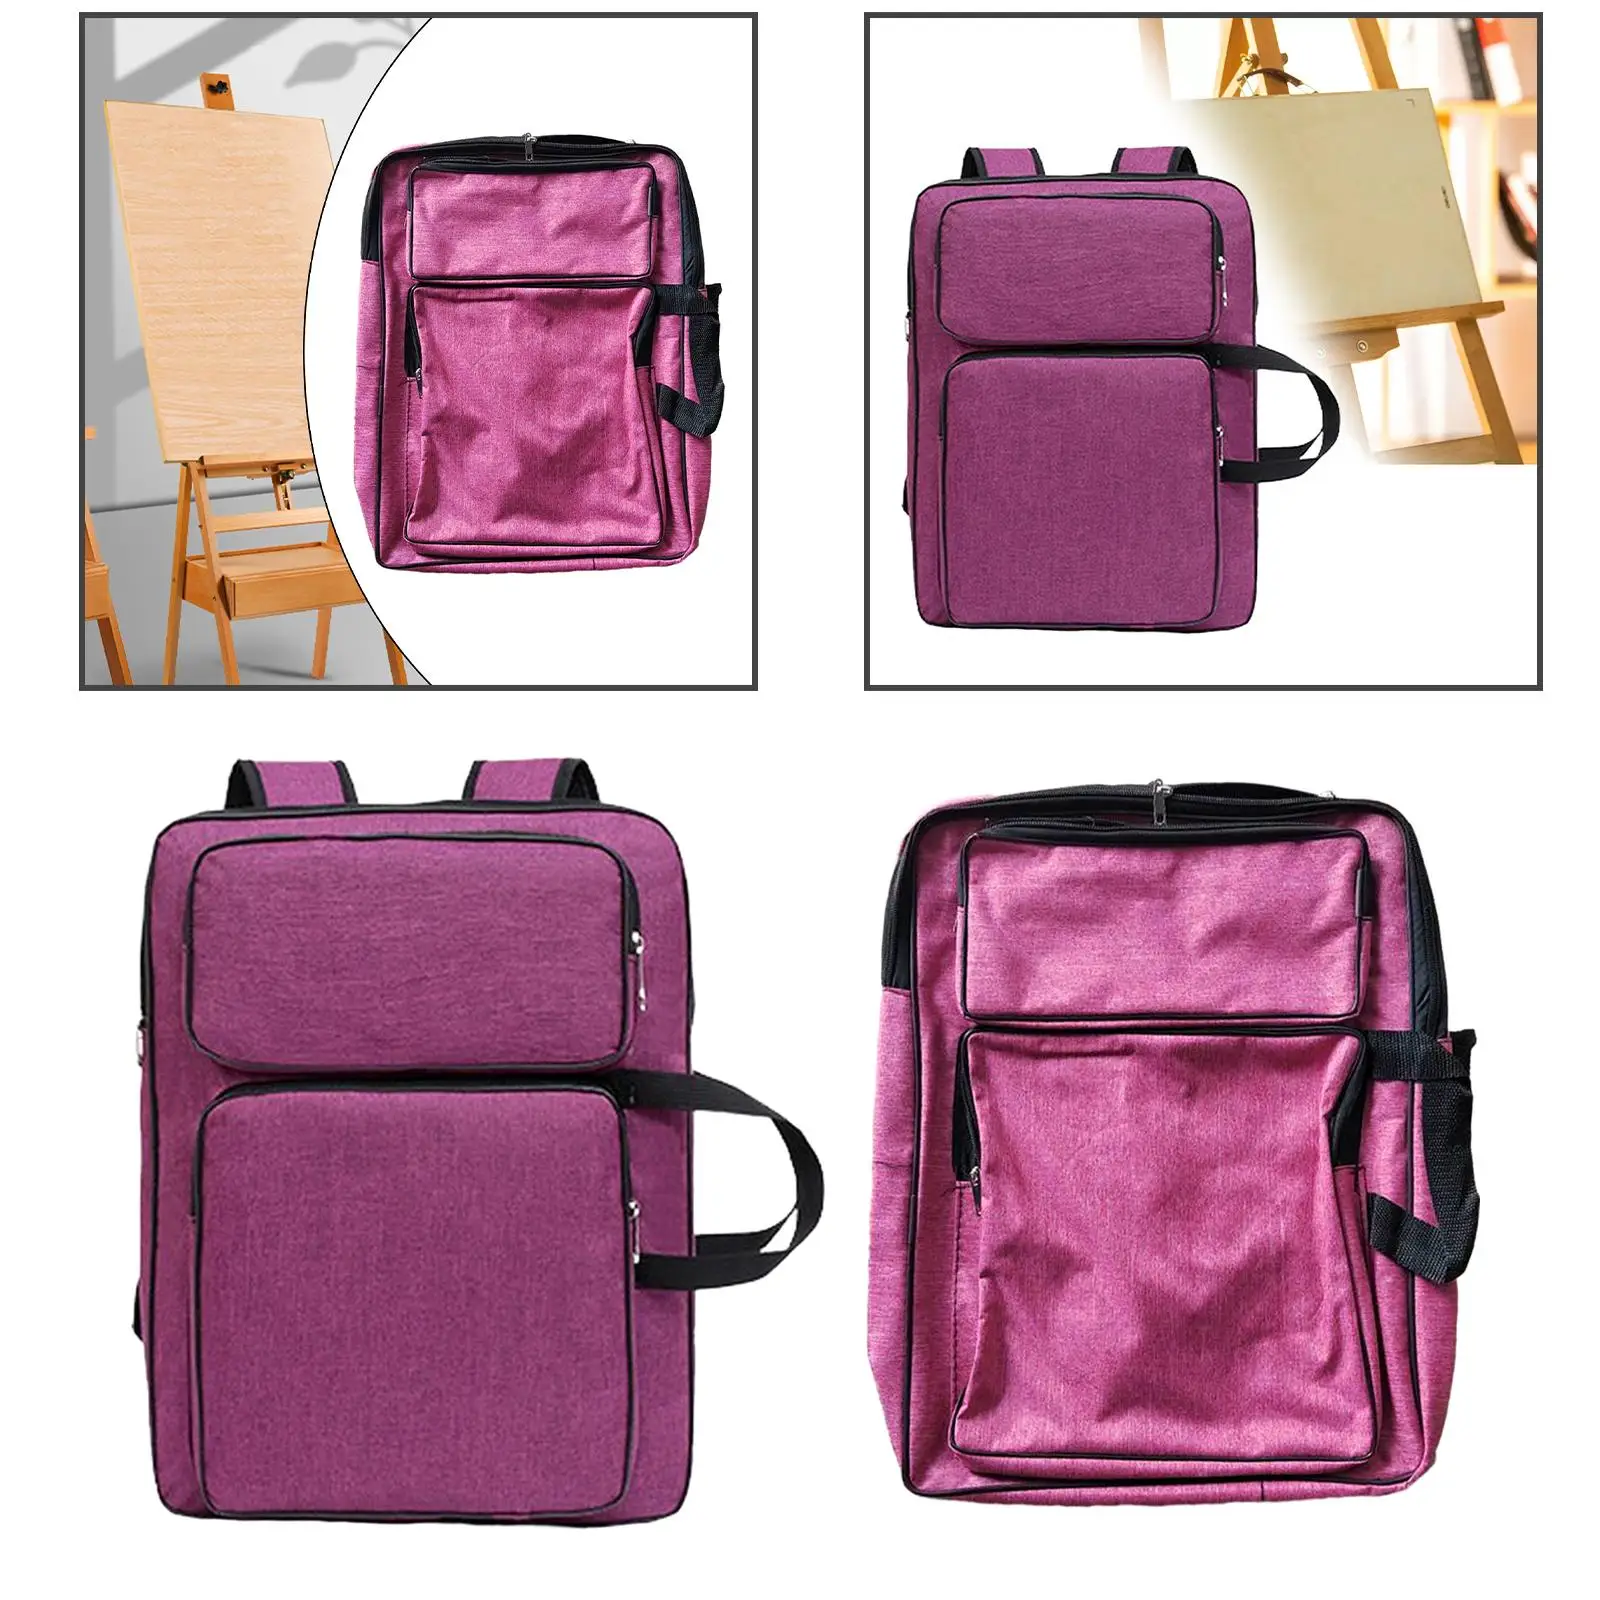 Art Portfolio Case Portable Carrying Bag Artists Backpack for Cleaning Pot Palette Display Screen Painting Tool Sketch Books